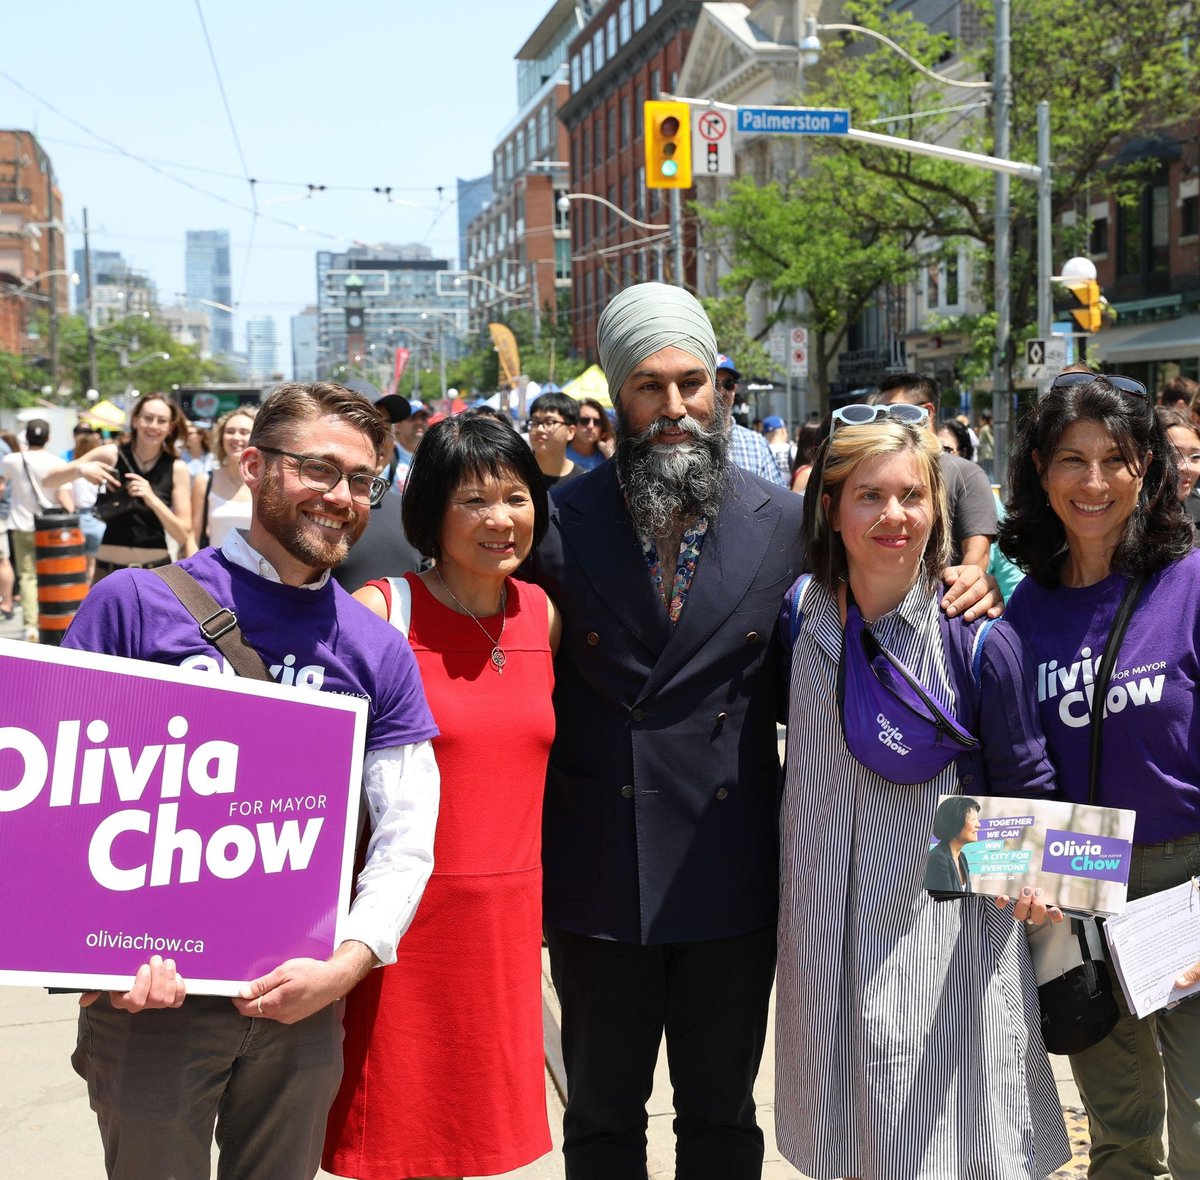 Congratulations to @OliviaChow and her team on their win tonight! Olivia's campaign focused on the real issues. She inspired a movement of people working to make Toronto a city for everyone. The City of Toronto is in great hands with Olivia as its mayor. 🧡💜